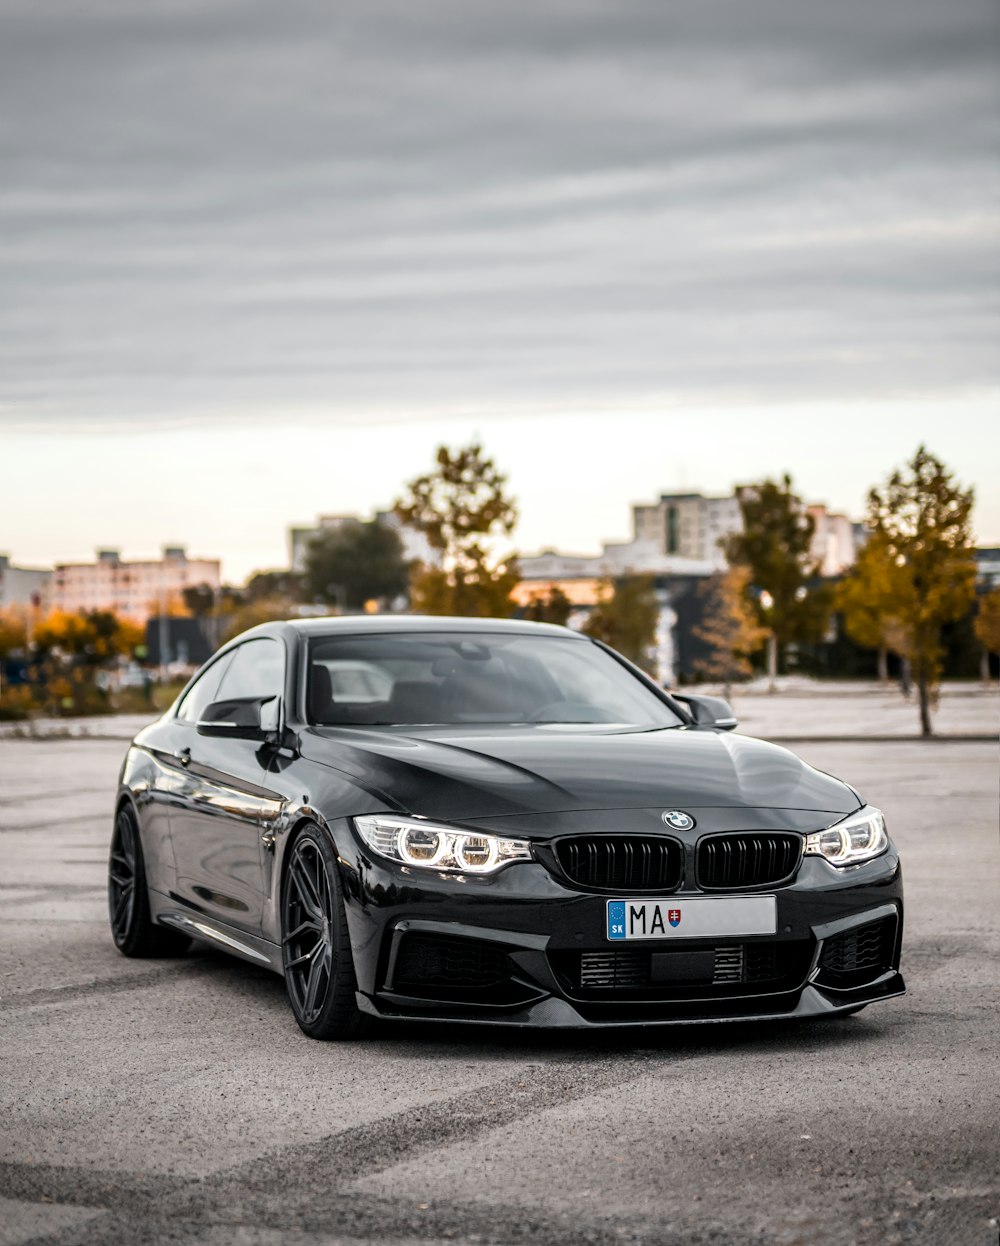 500+ Bmw M3 Pictures  Download Free Images & Stock Photos on Unsplash